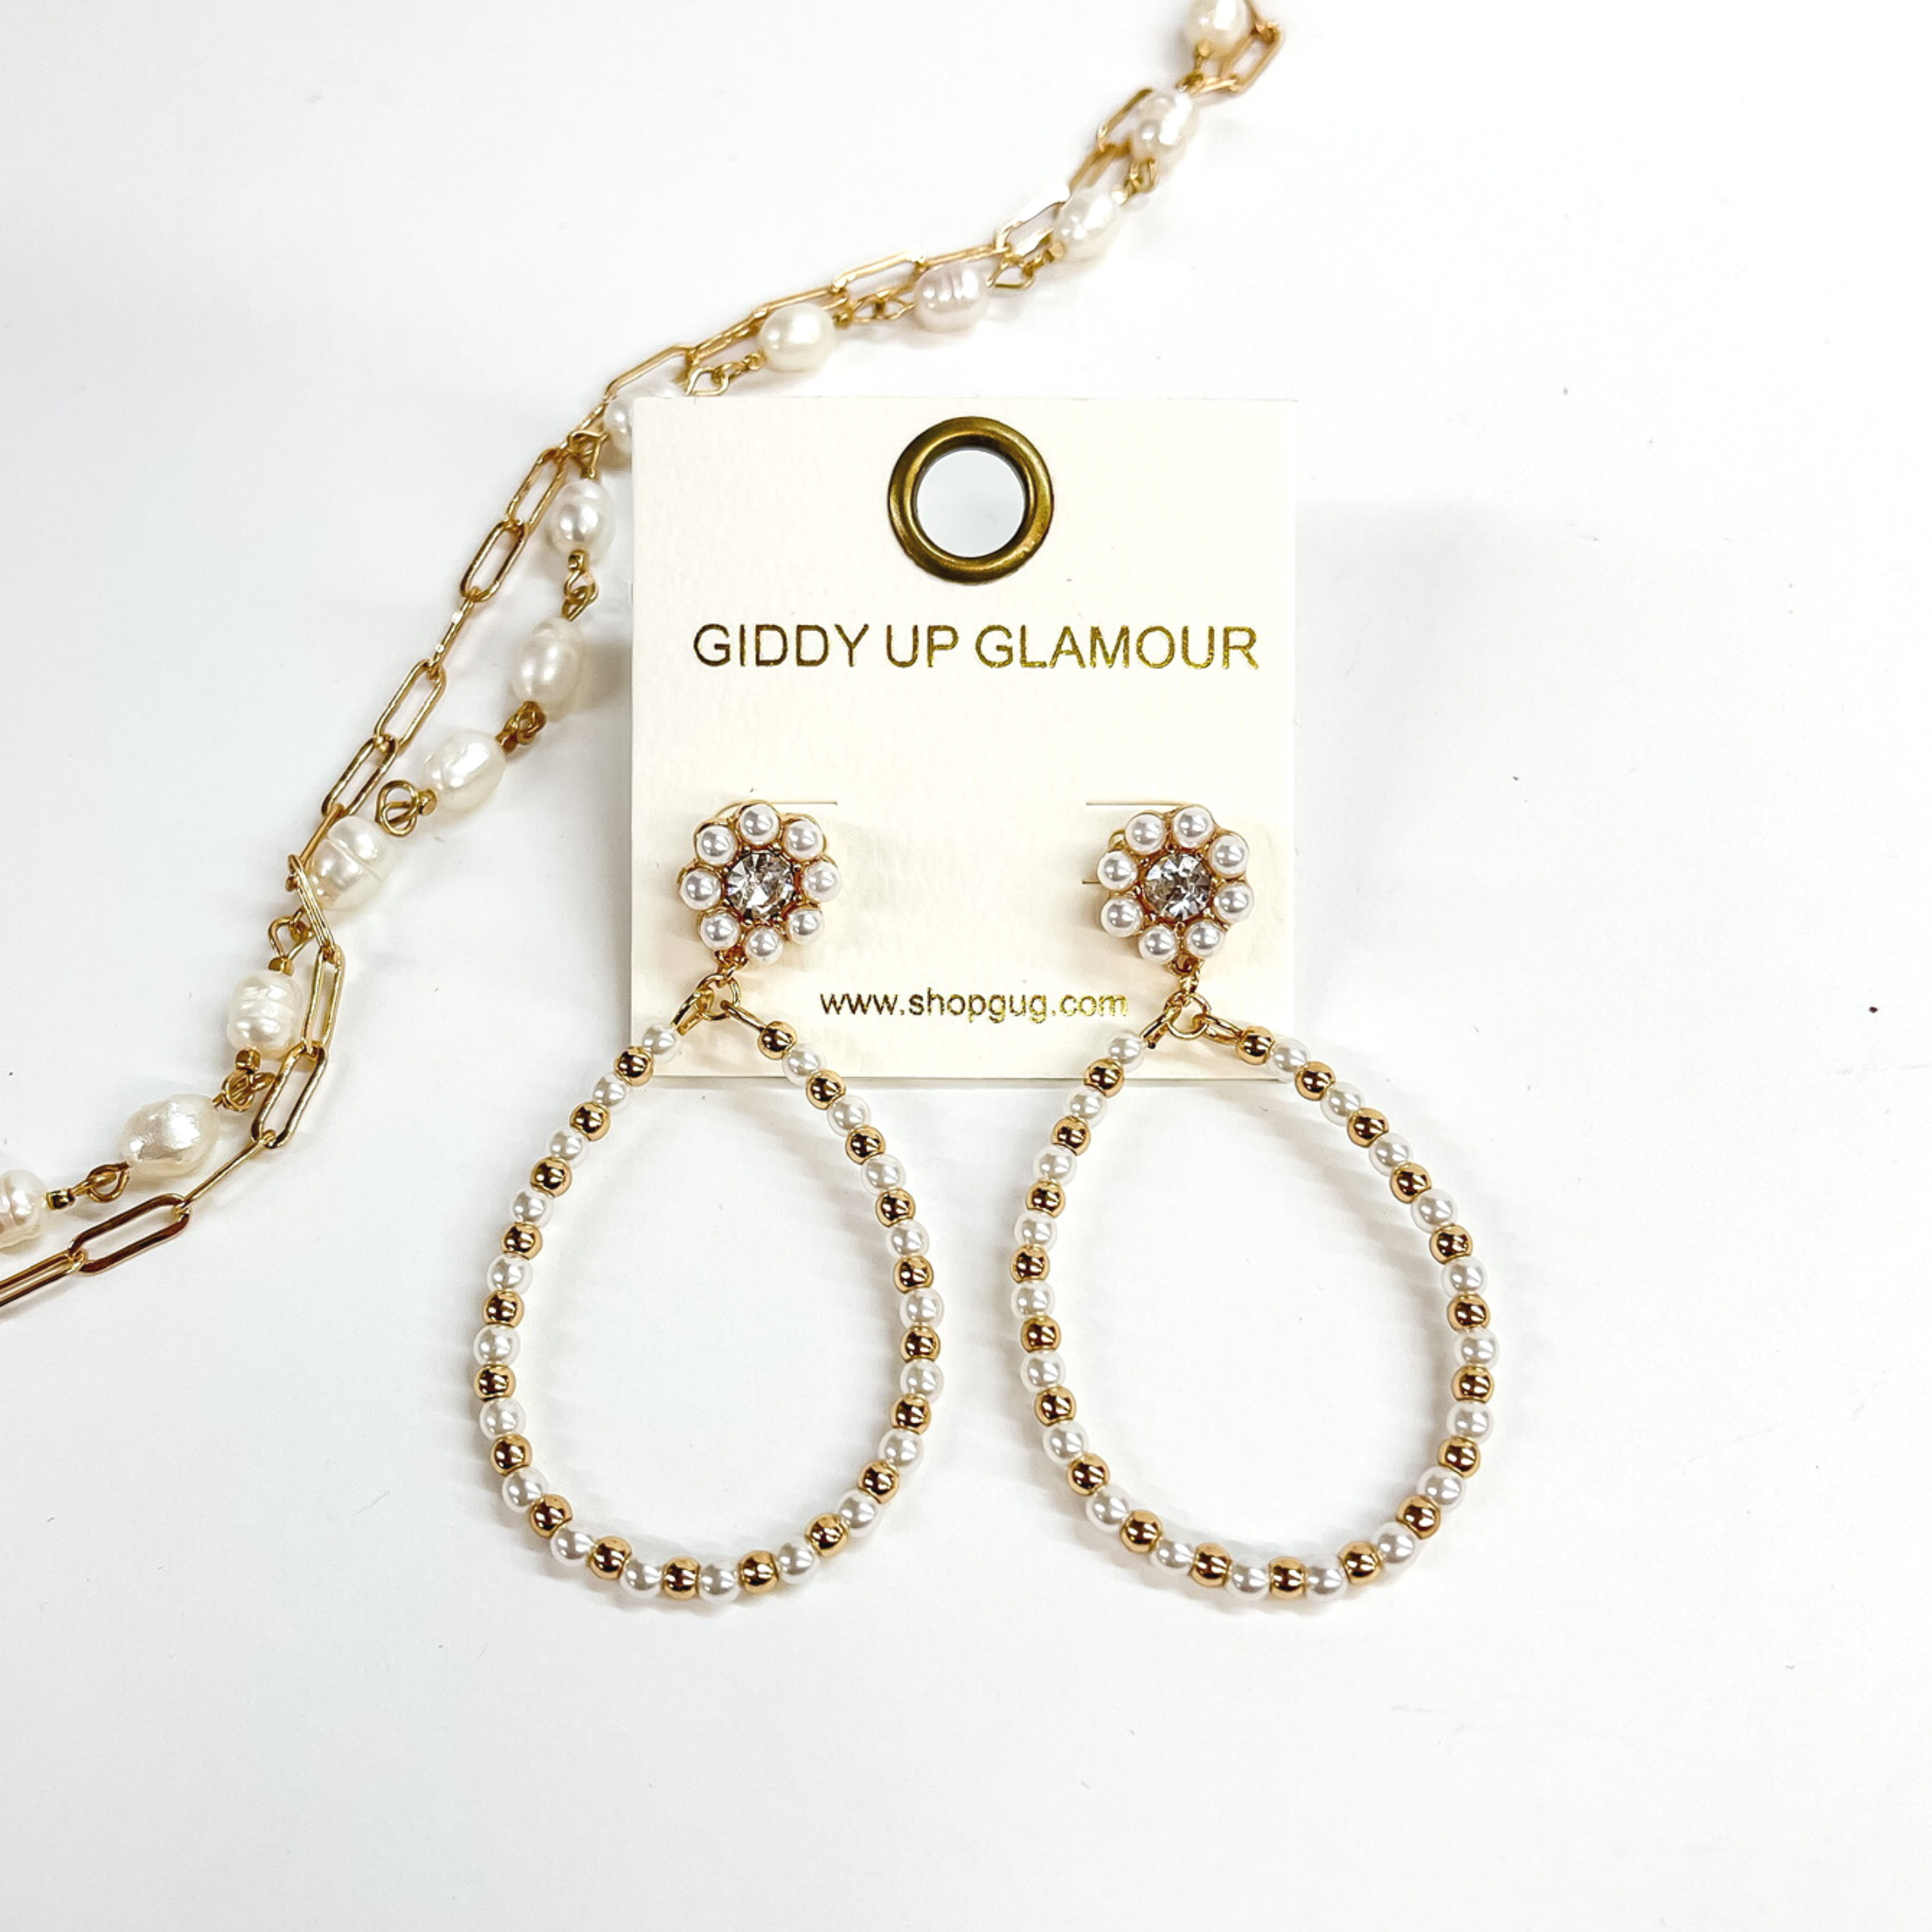 Beaded Flower Post Back Earrings with Teardrop Pendant in Gold and Ivory - Giddy Up Glamour Boutique